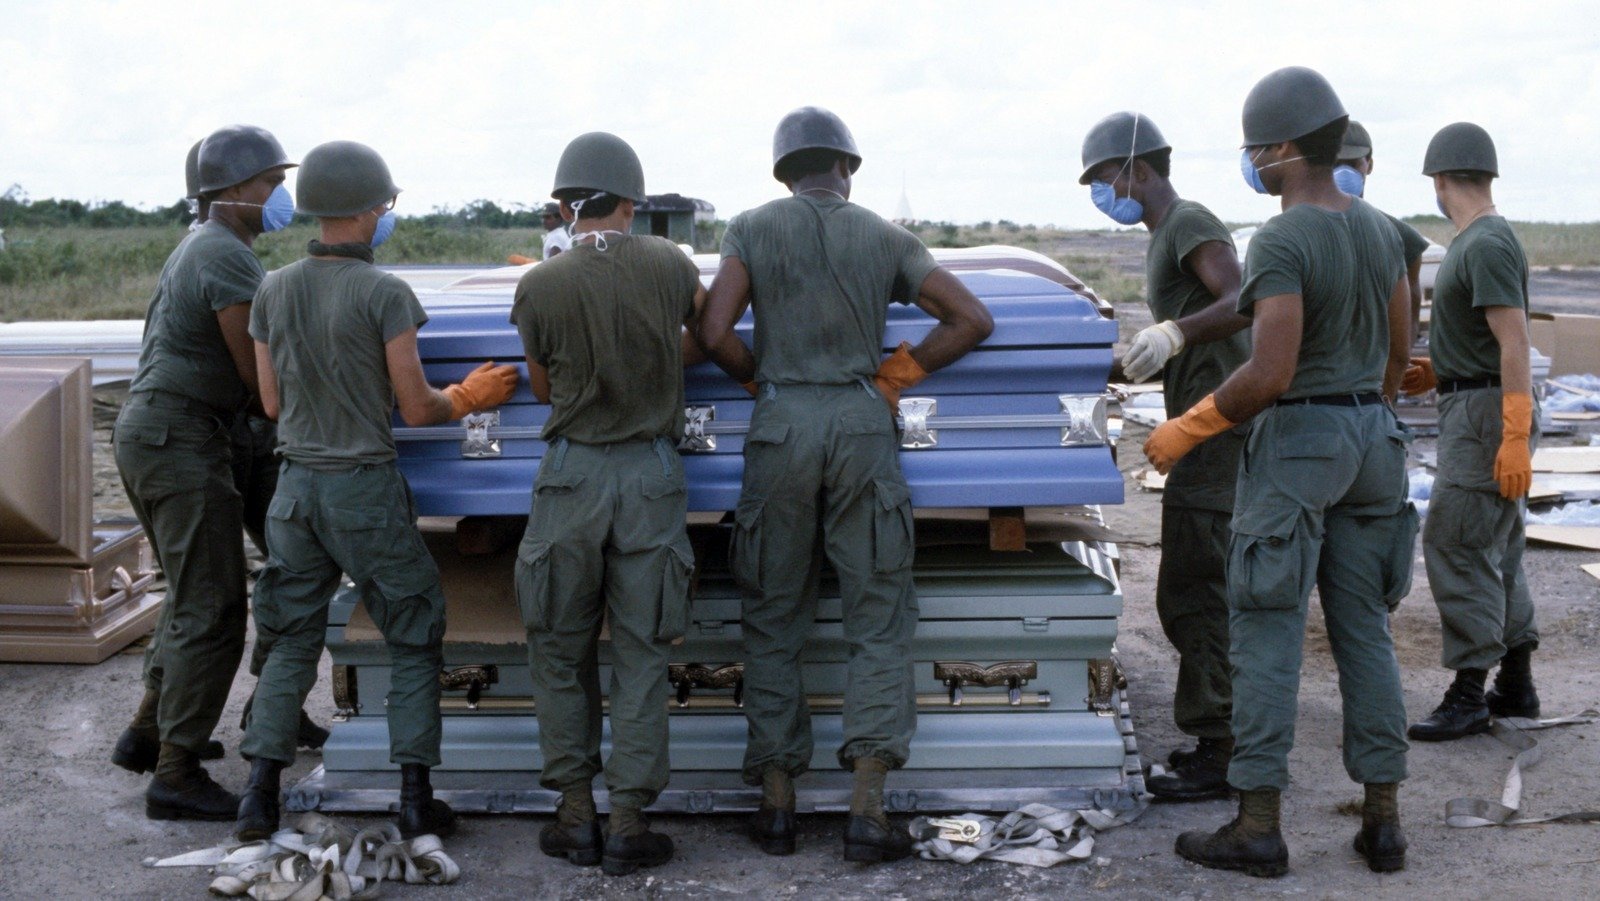 What happened to the bodies at Jonestown?